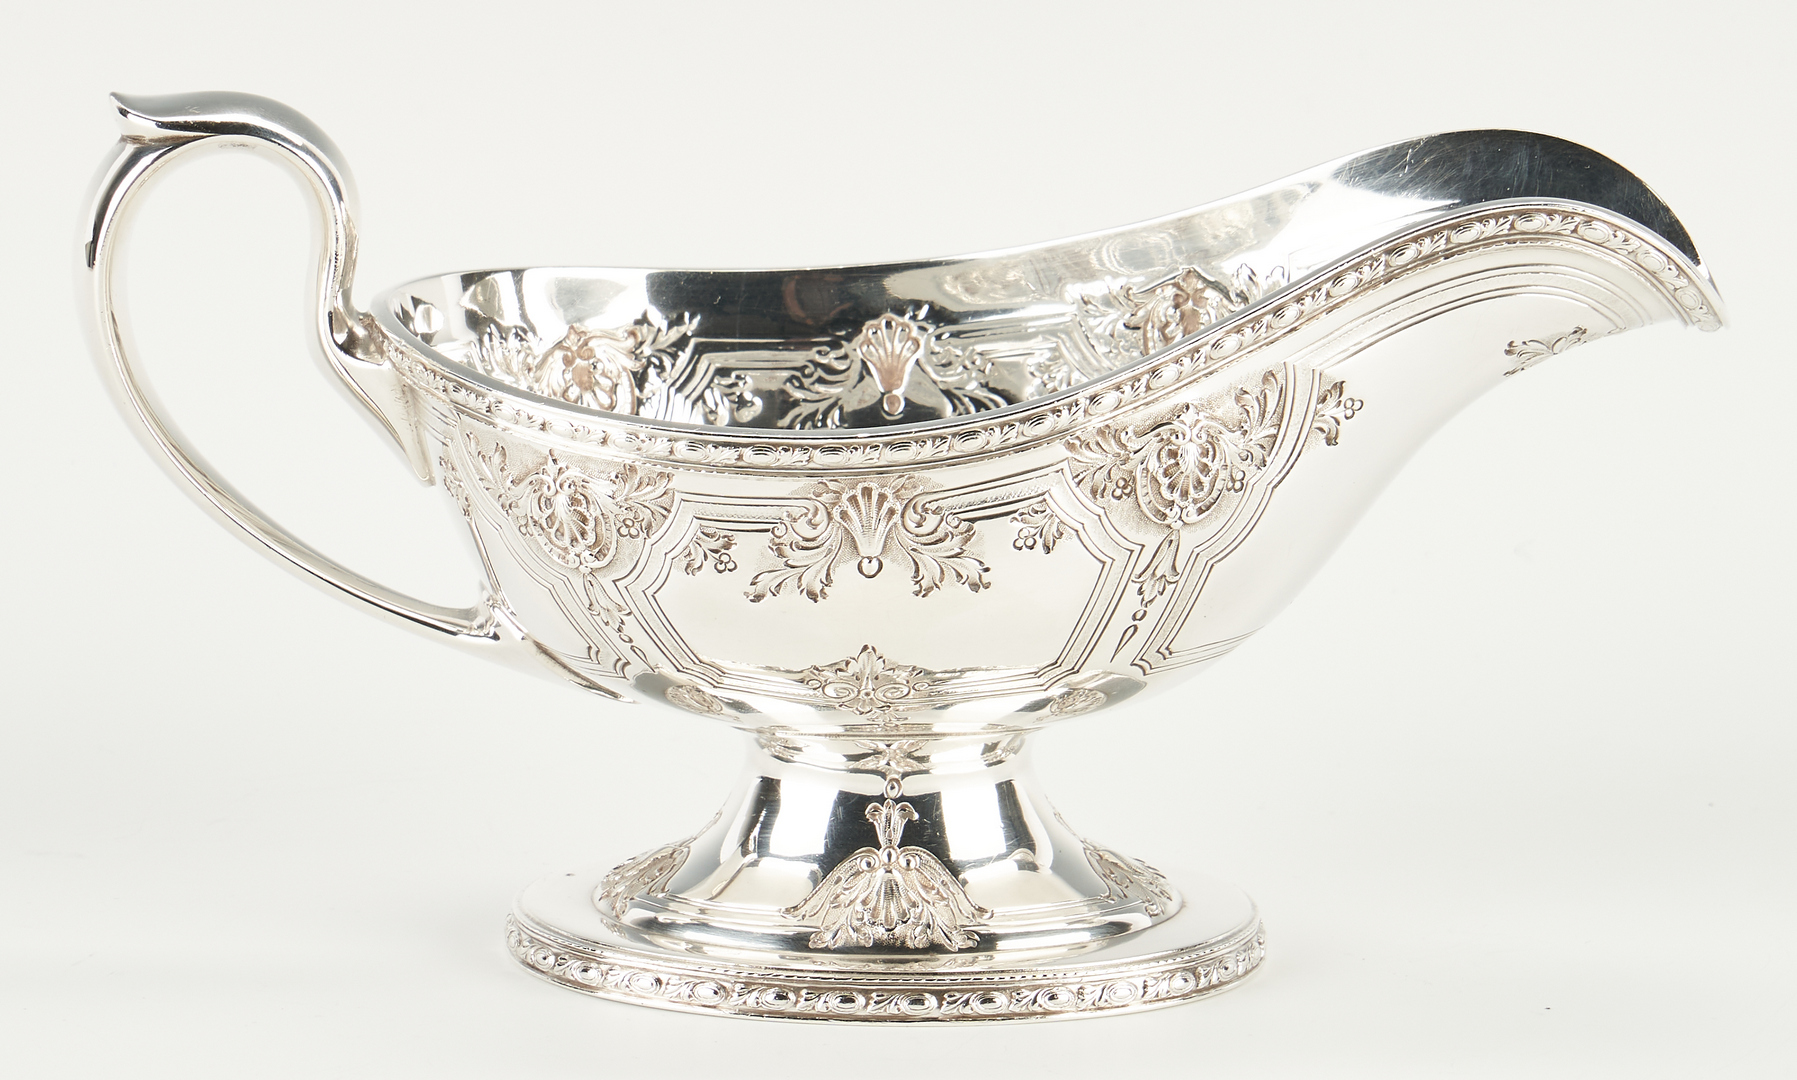 Lot 912: Grouping of 15 Sterling Silver Items, incl. Navarre Gravy Boat